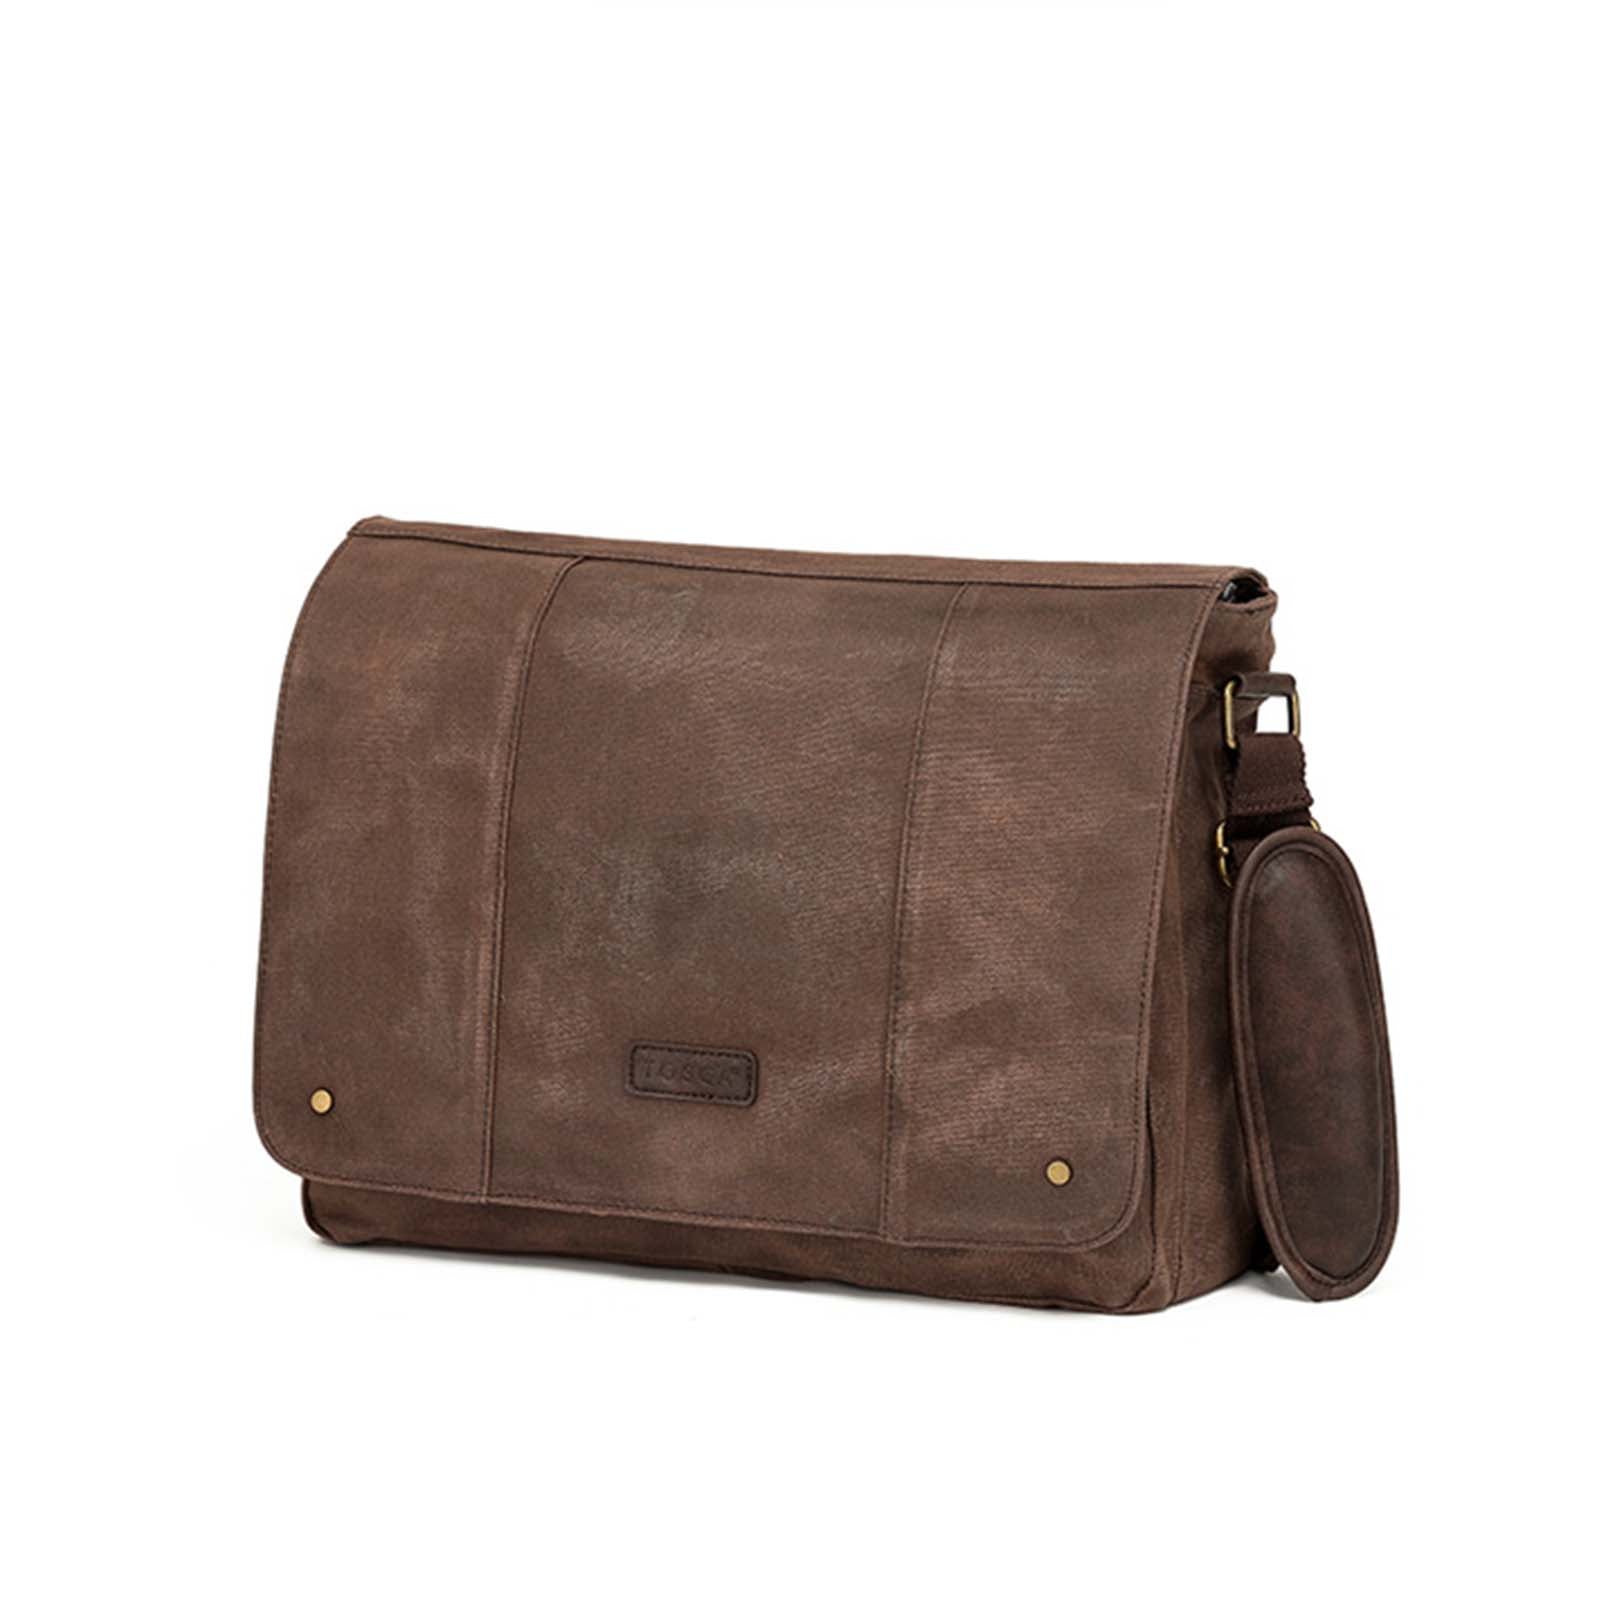 Tosca_Waxed_Canvas_Laptop_Messenger_BagBrown_Front.jpg